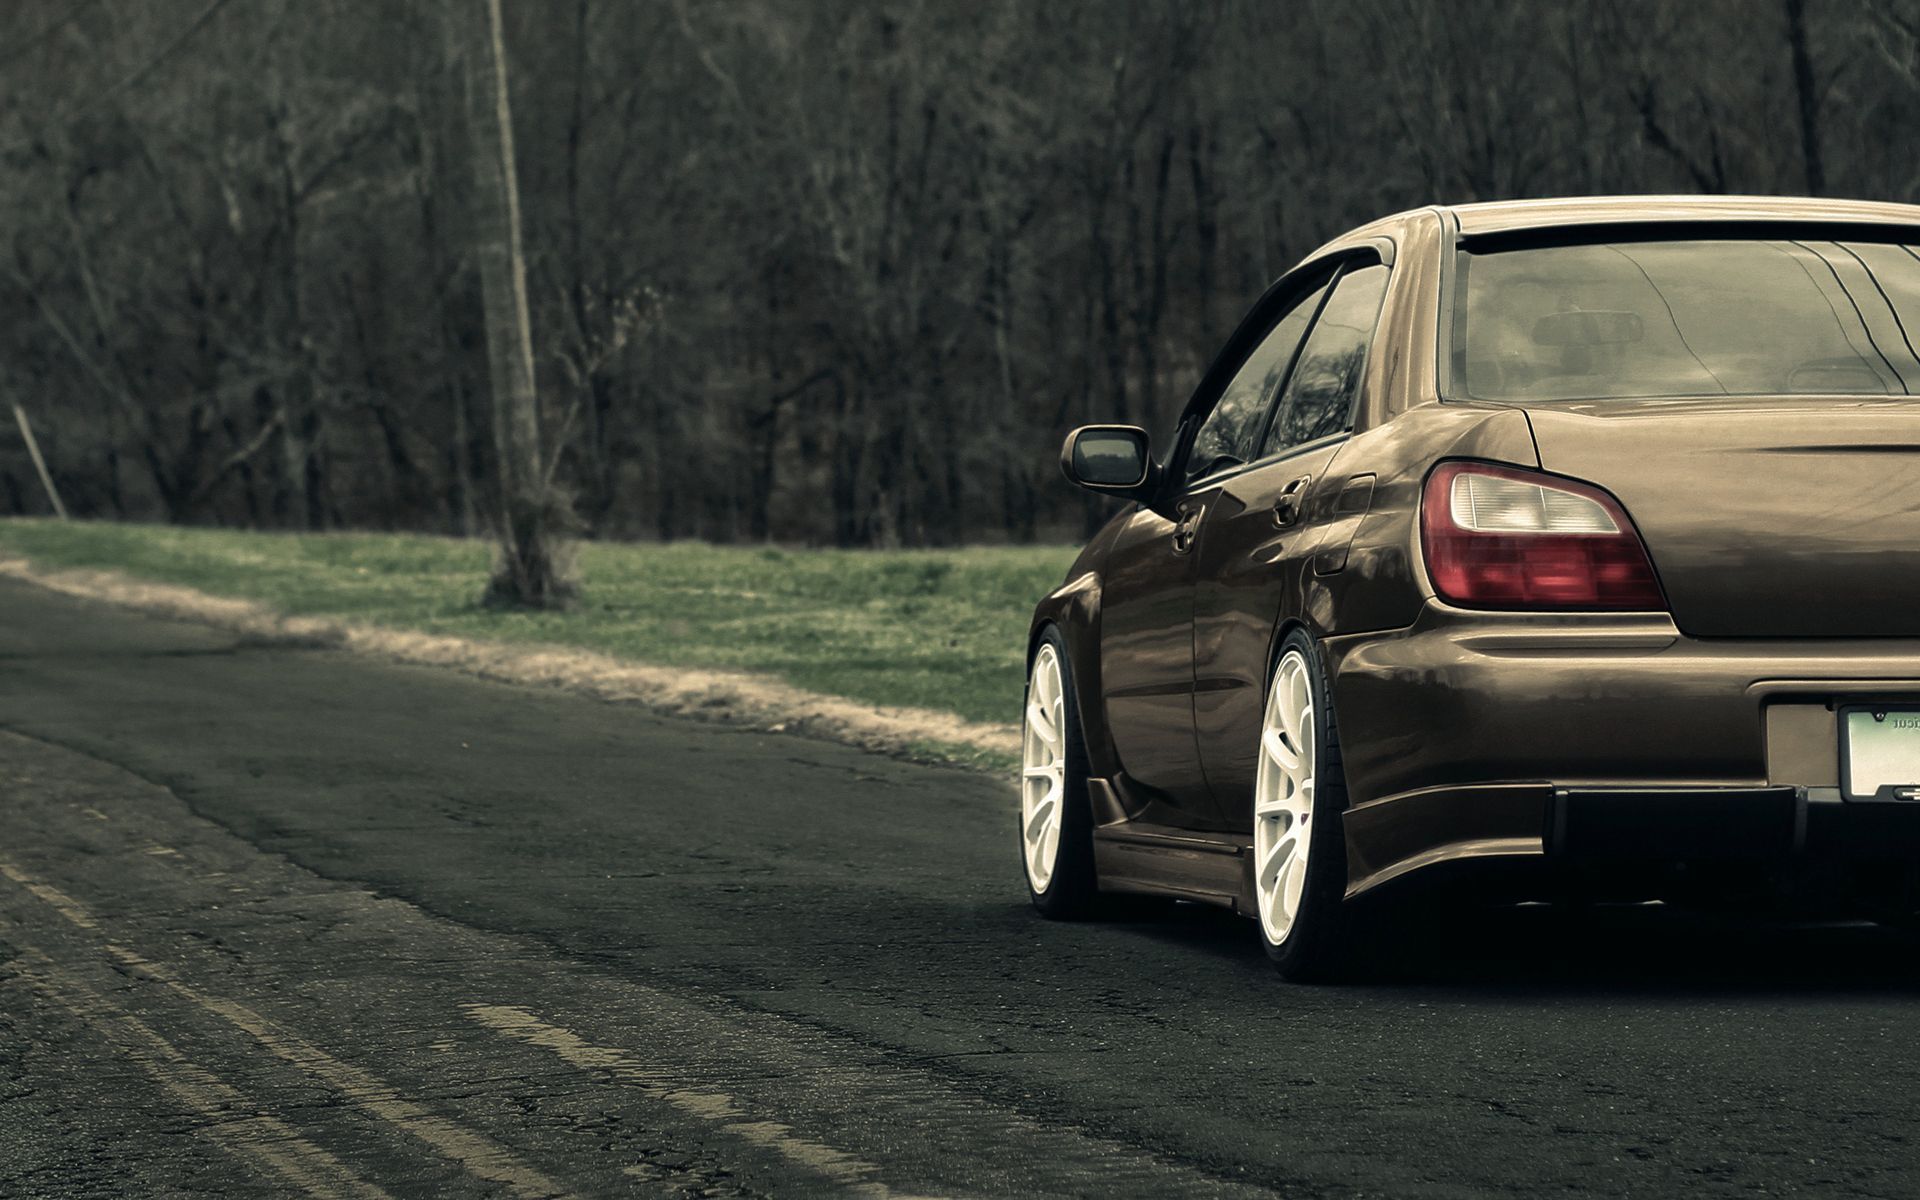 Subaru Impreza WRX wallpapers and images - wallpapers, pictures